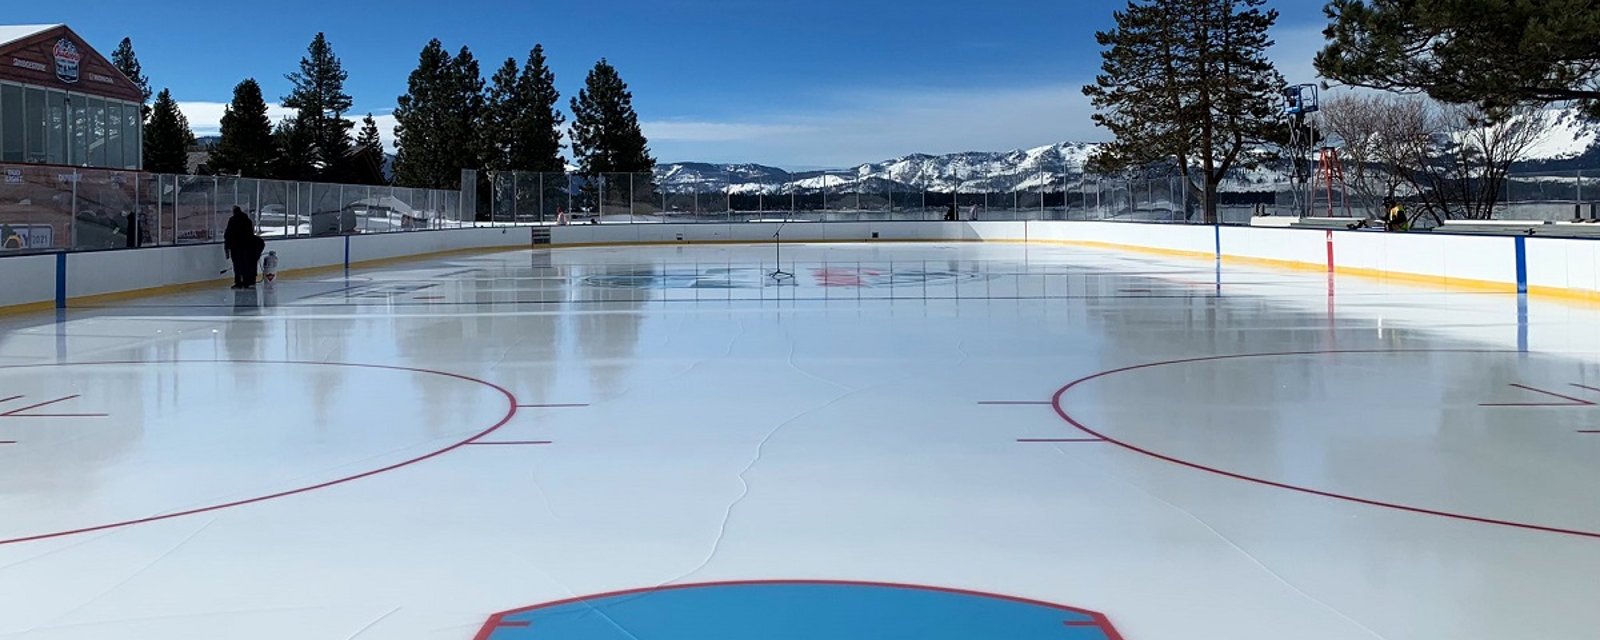 Breathtaking images of the NHL's outdoor rink at Lake Tahoe.